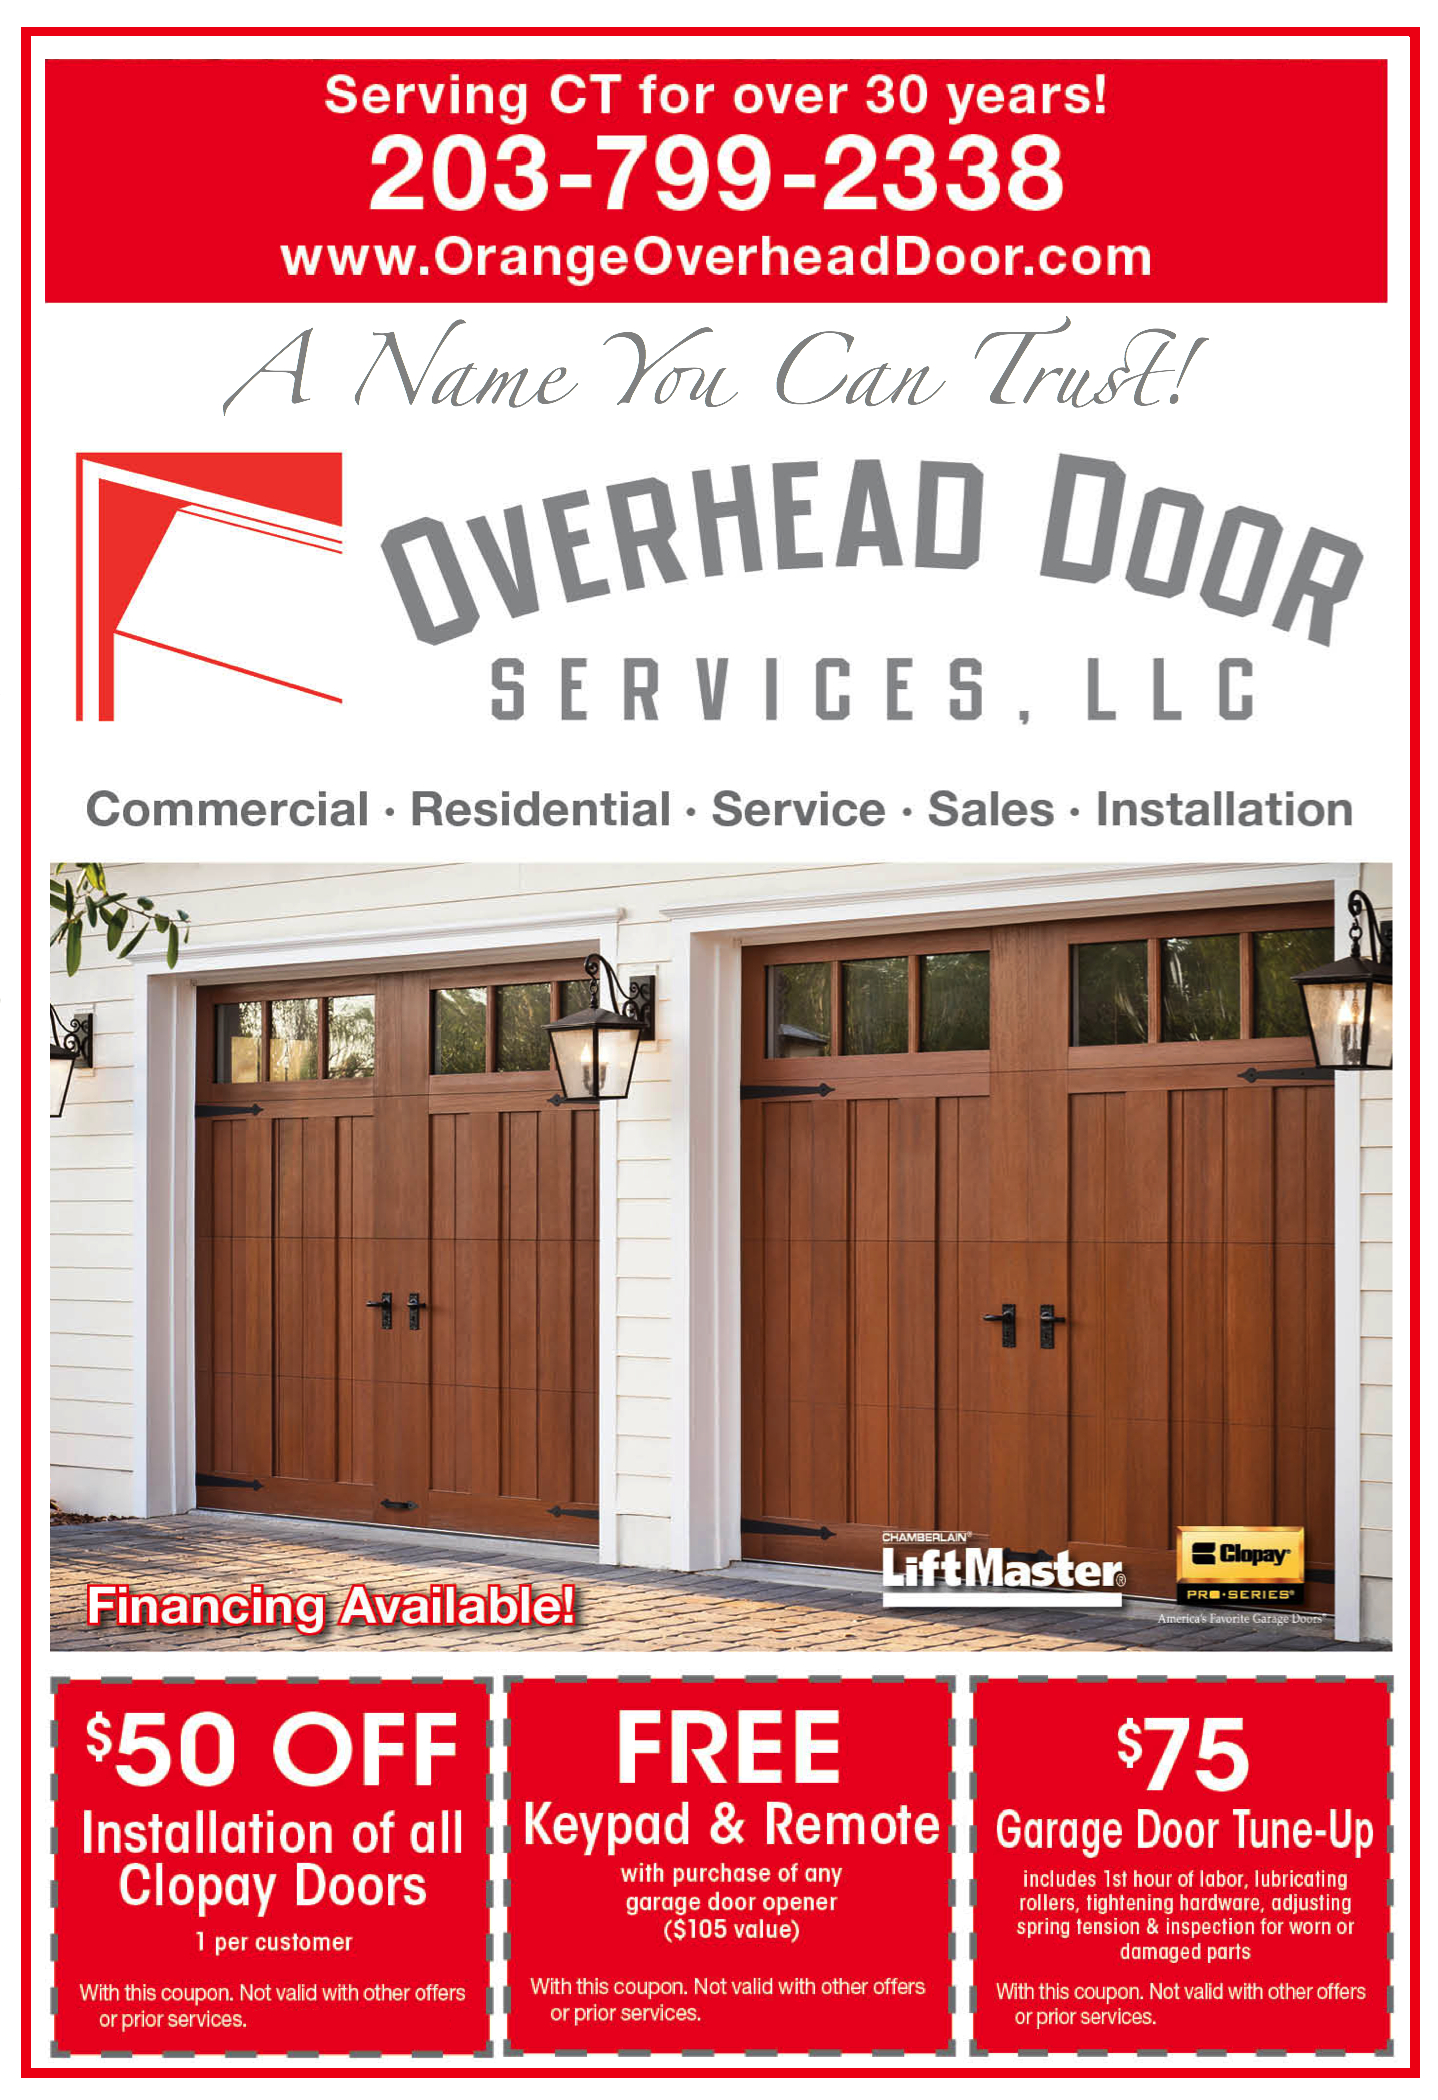 Specials And Promotions Orange Ct Overhead Door Services within size 1438 X 2100